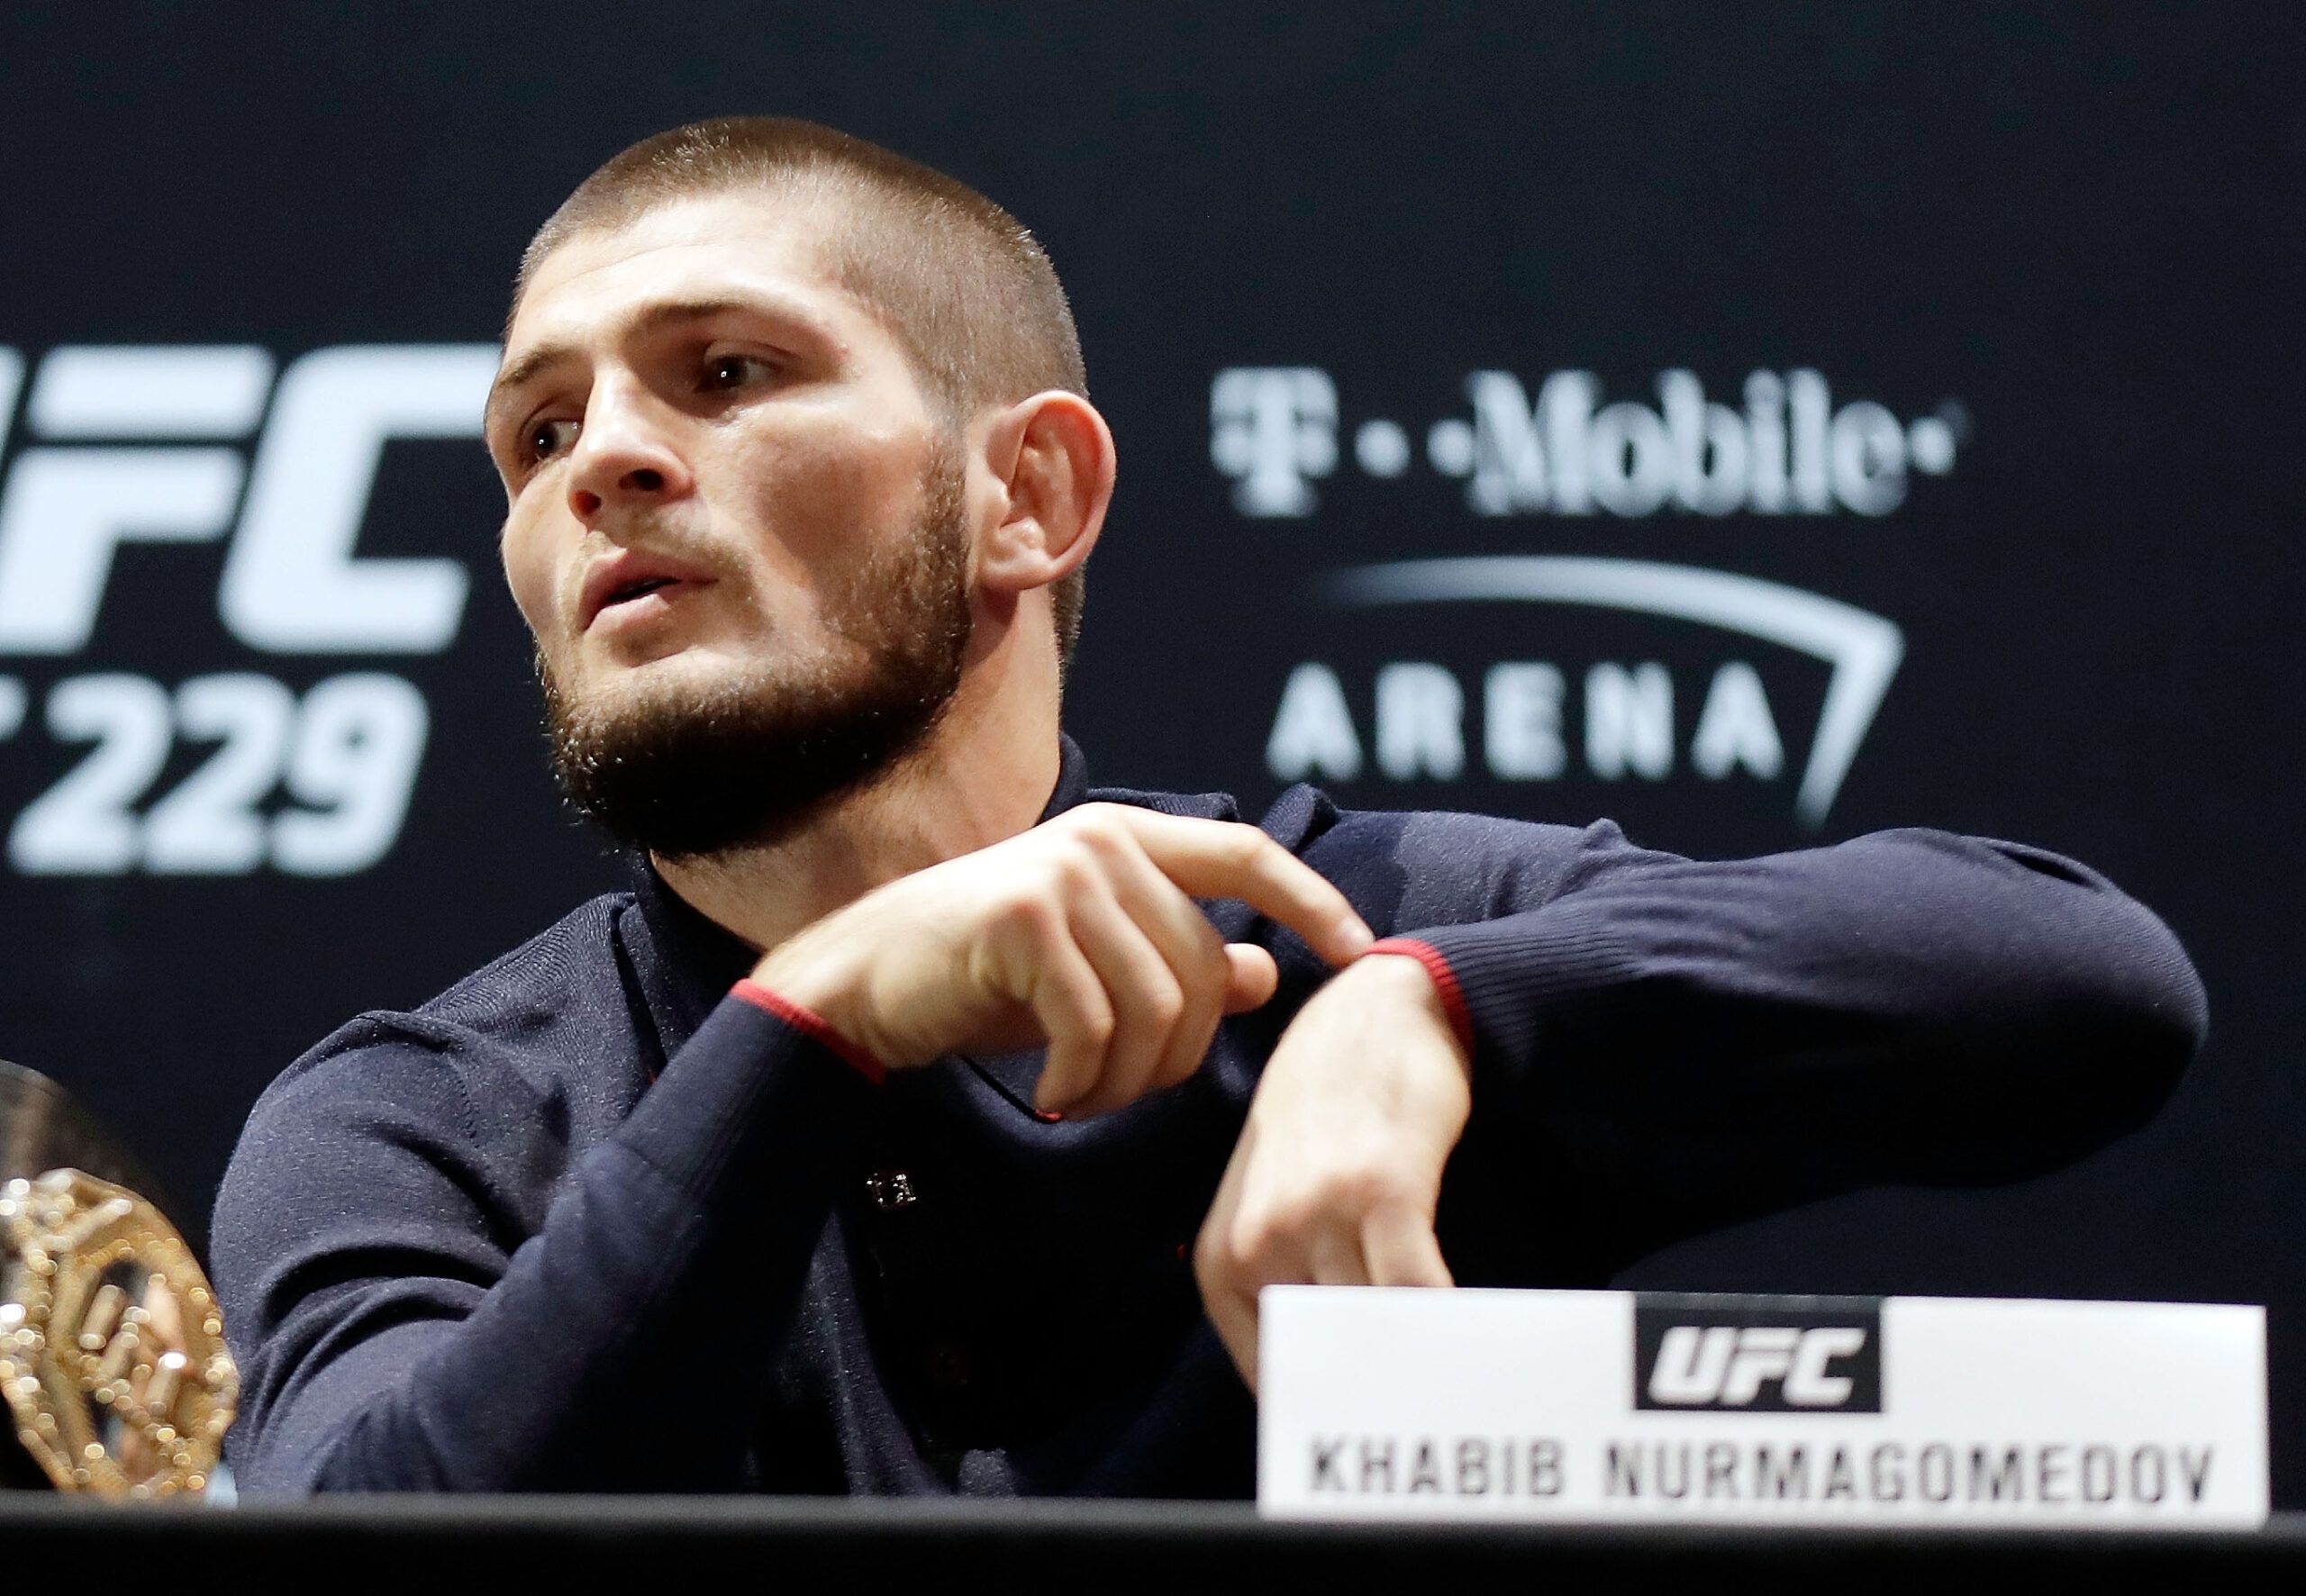 UFC News: Khabib Nurmagomedov presented with an honorable memento during  soccer match in Dagestan